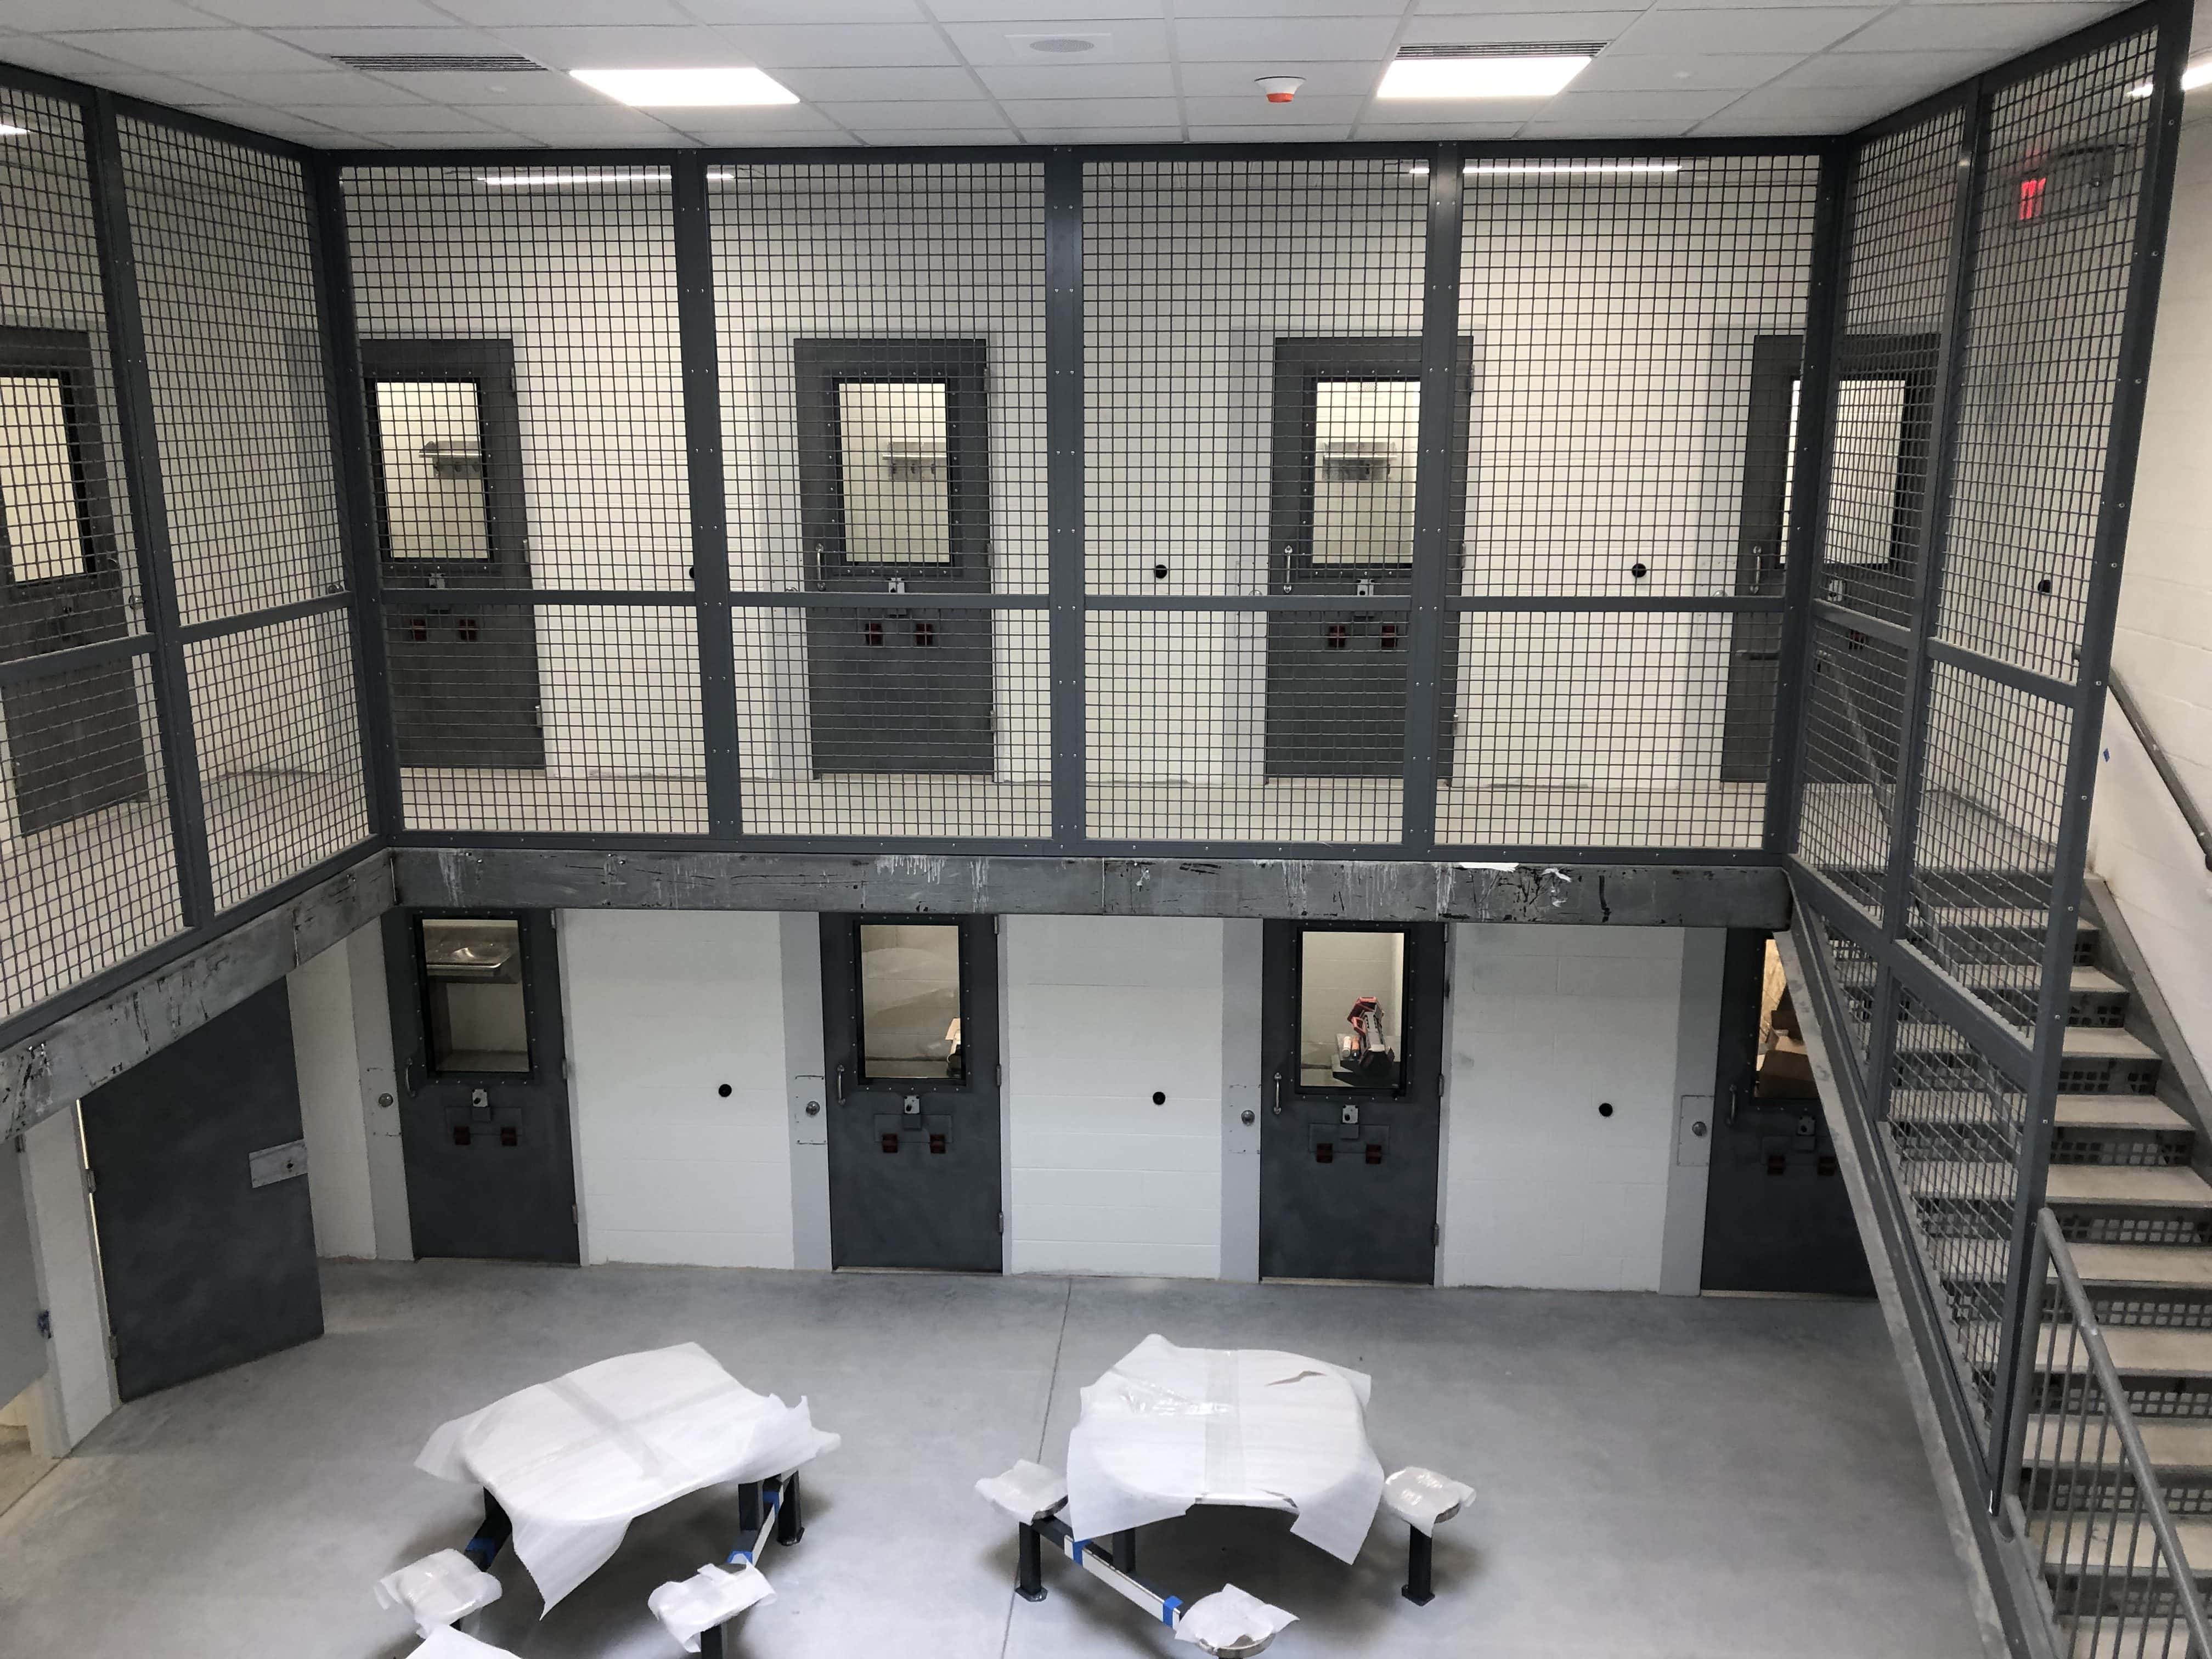 Here's a look at Lee County's new jail facility WGLC